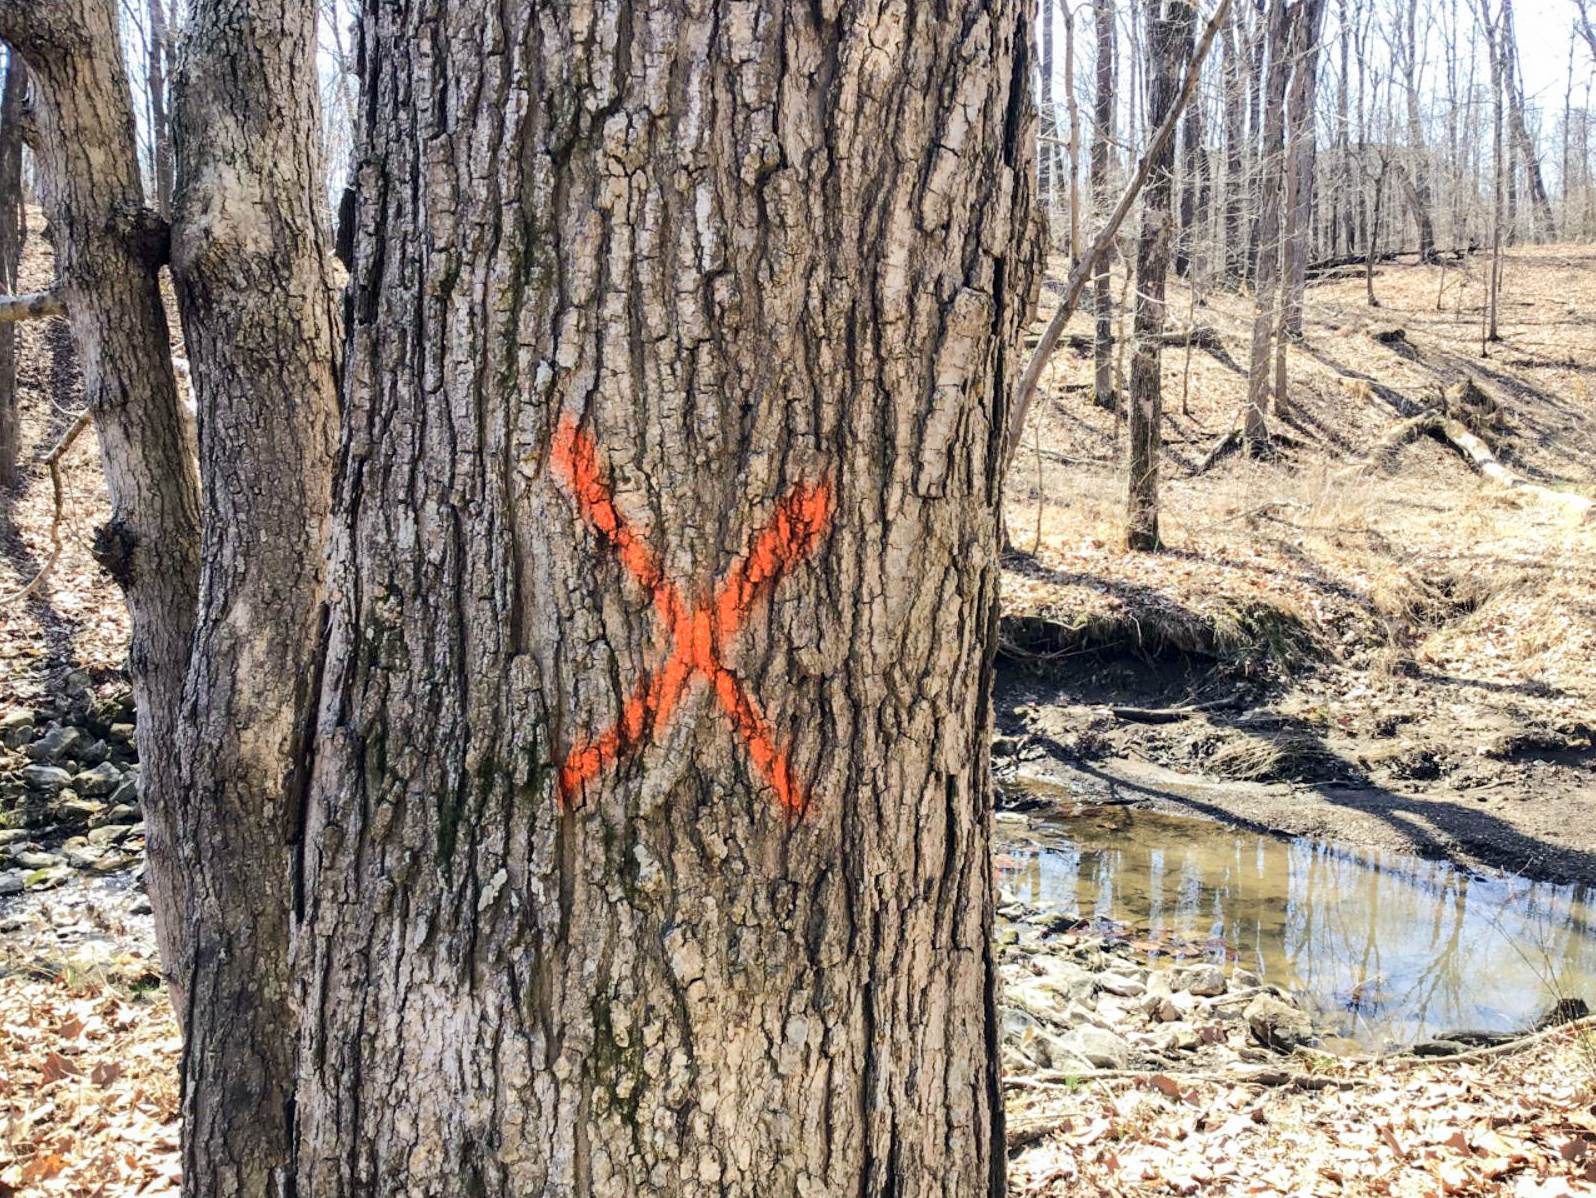 A tree marked with an “X” in spray paint in a wooded area.